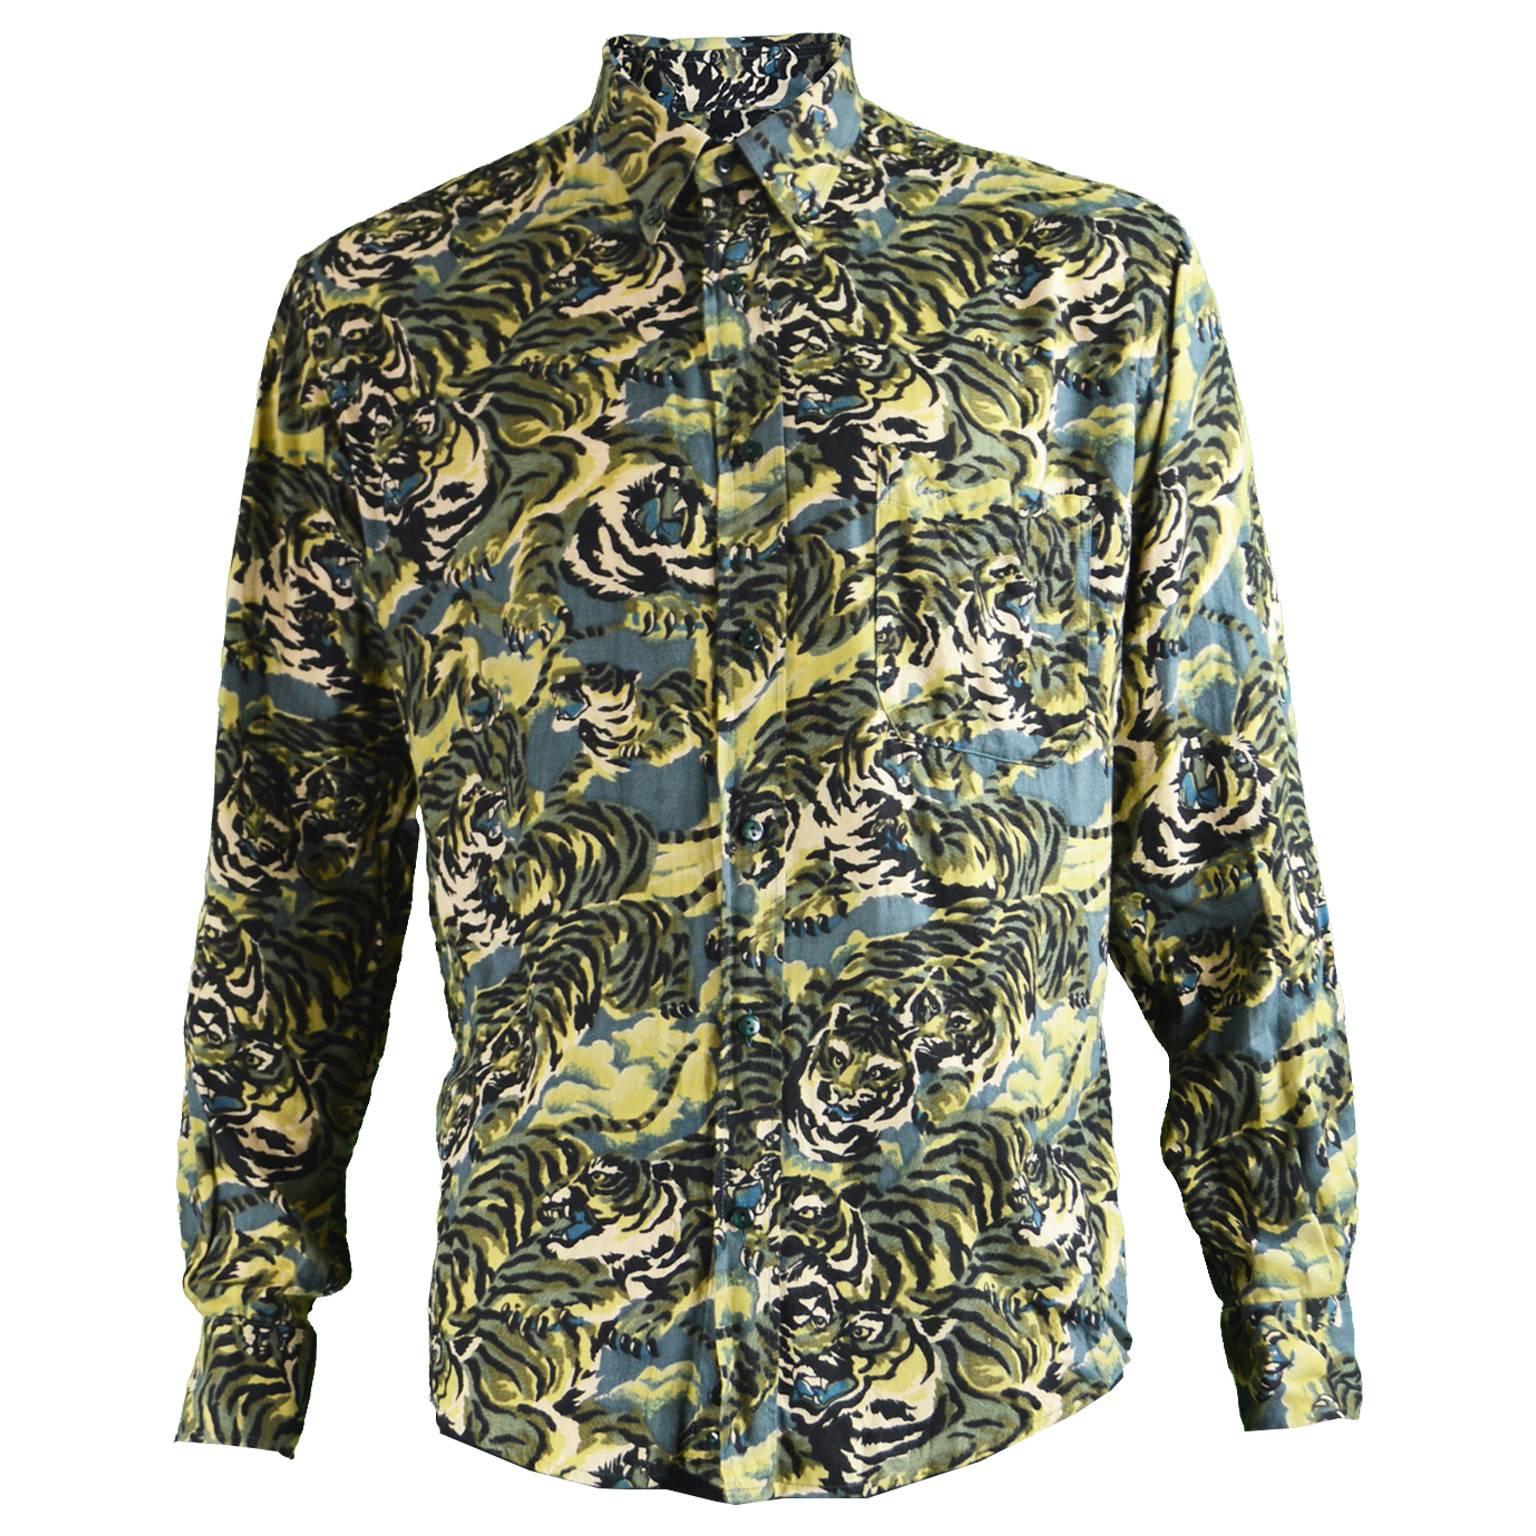 Kenzo Men's Vintage Iconic 'Flying Tiger' Print Button Down Shirt, 1990s